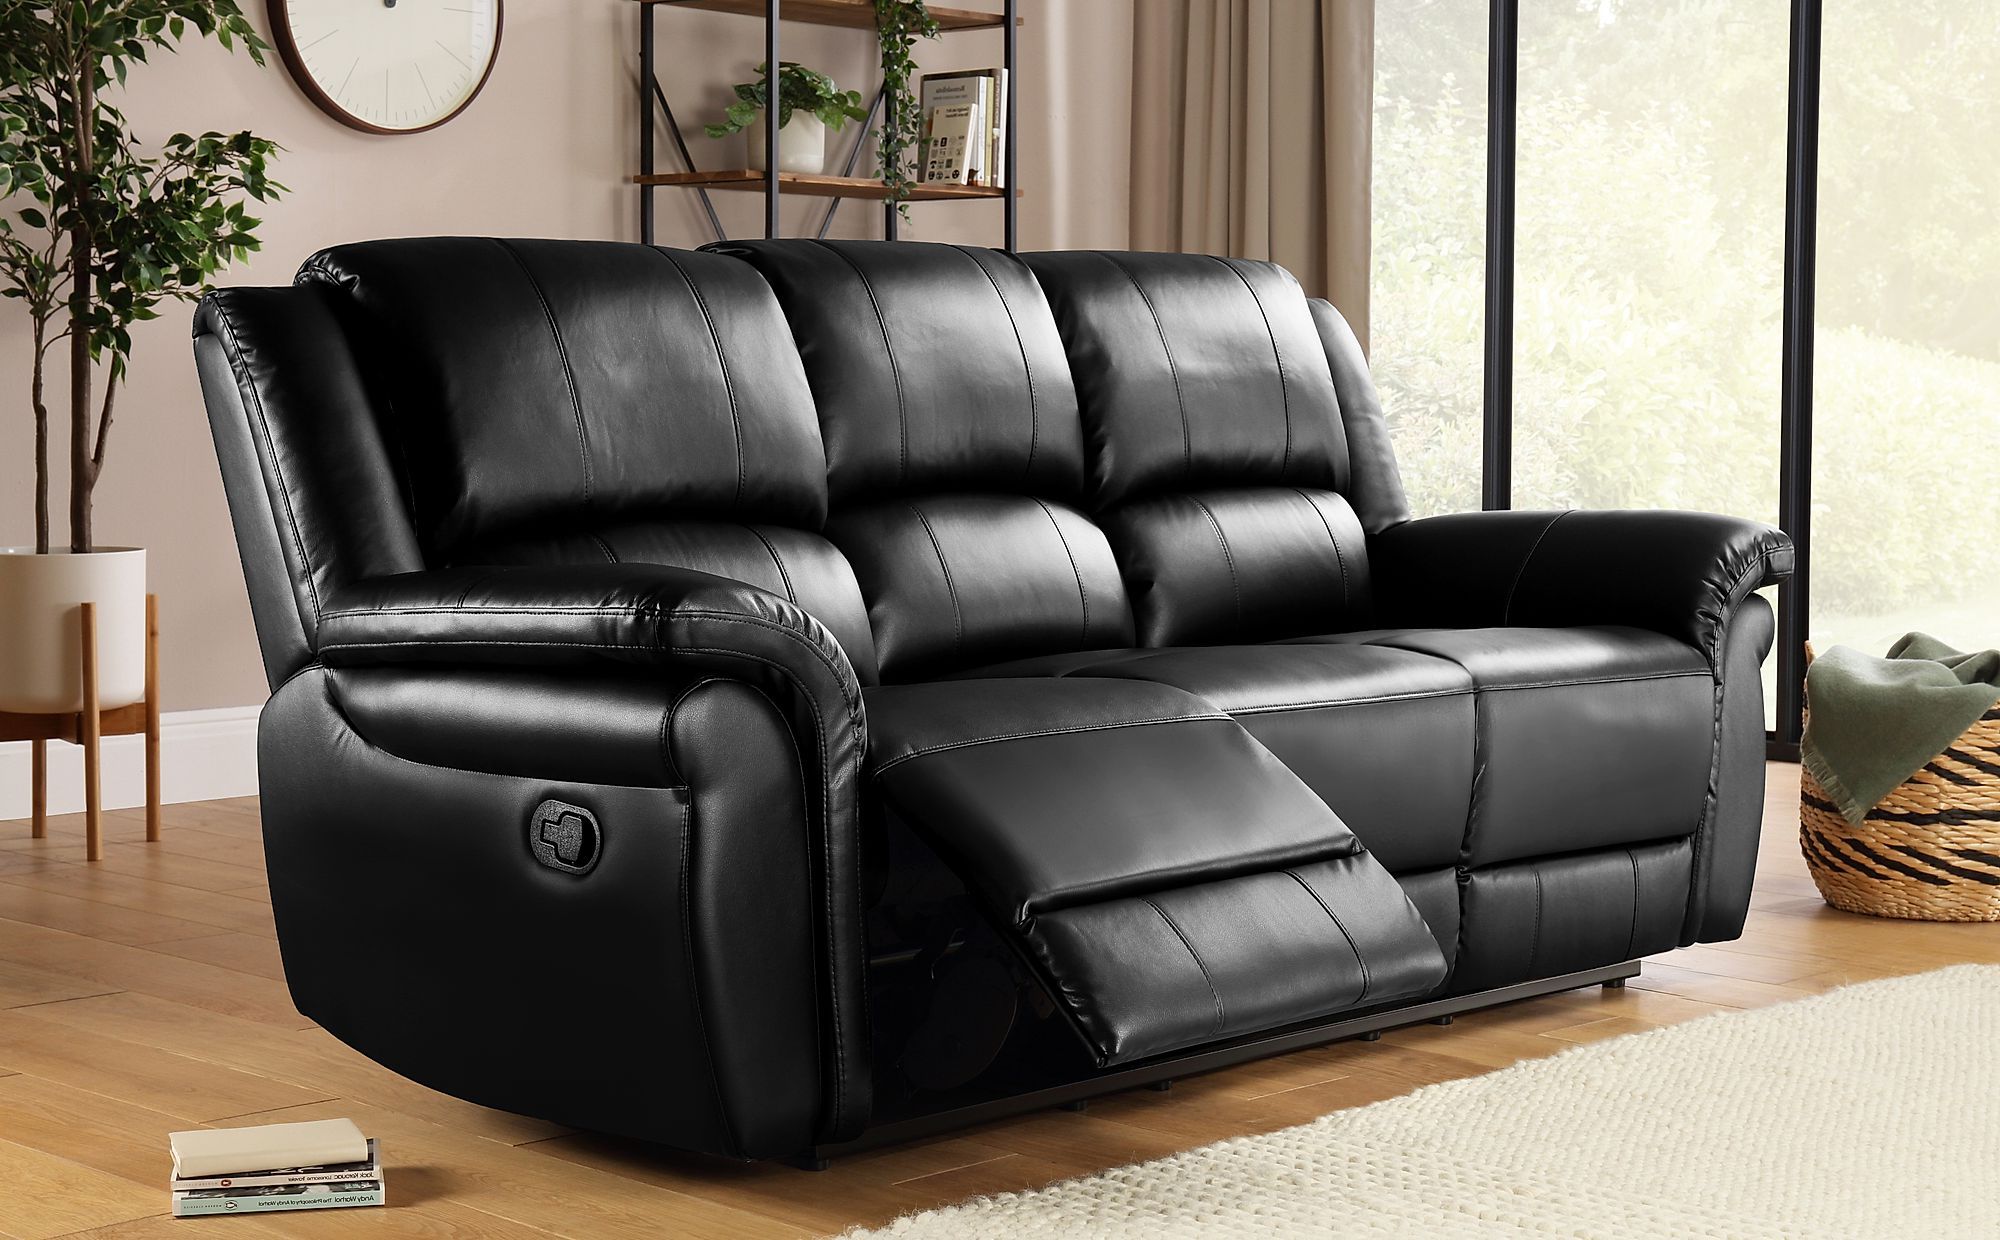 Lombard Black Leather 3 Seater Recliner Sofa | Furniture Choice Intended For 3 Seat L Shaped Sofas In Black (Gallery 12 of 20)